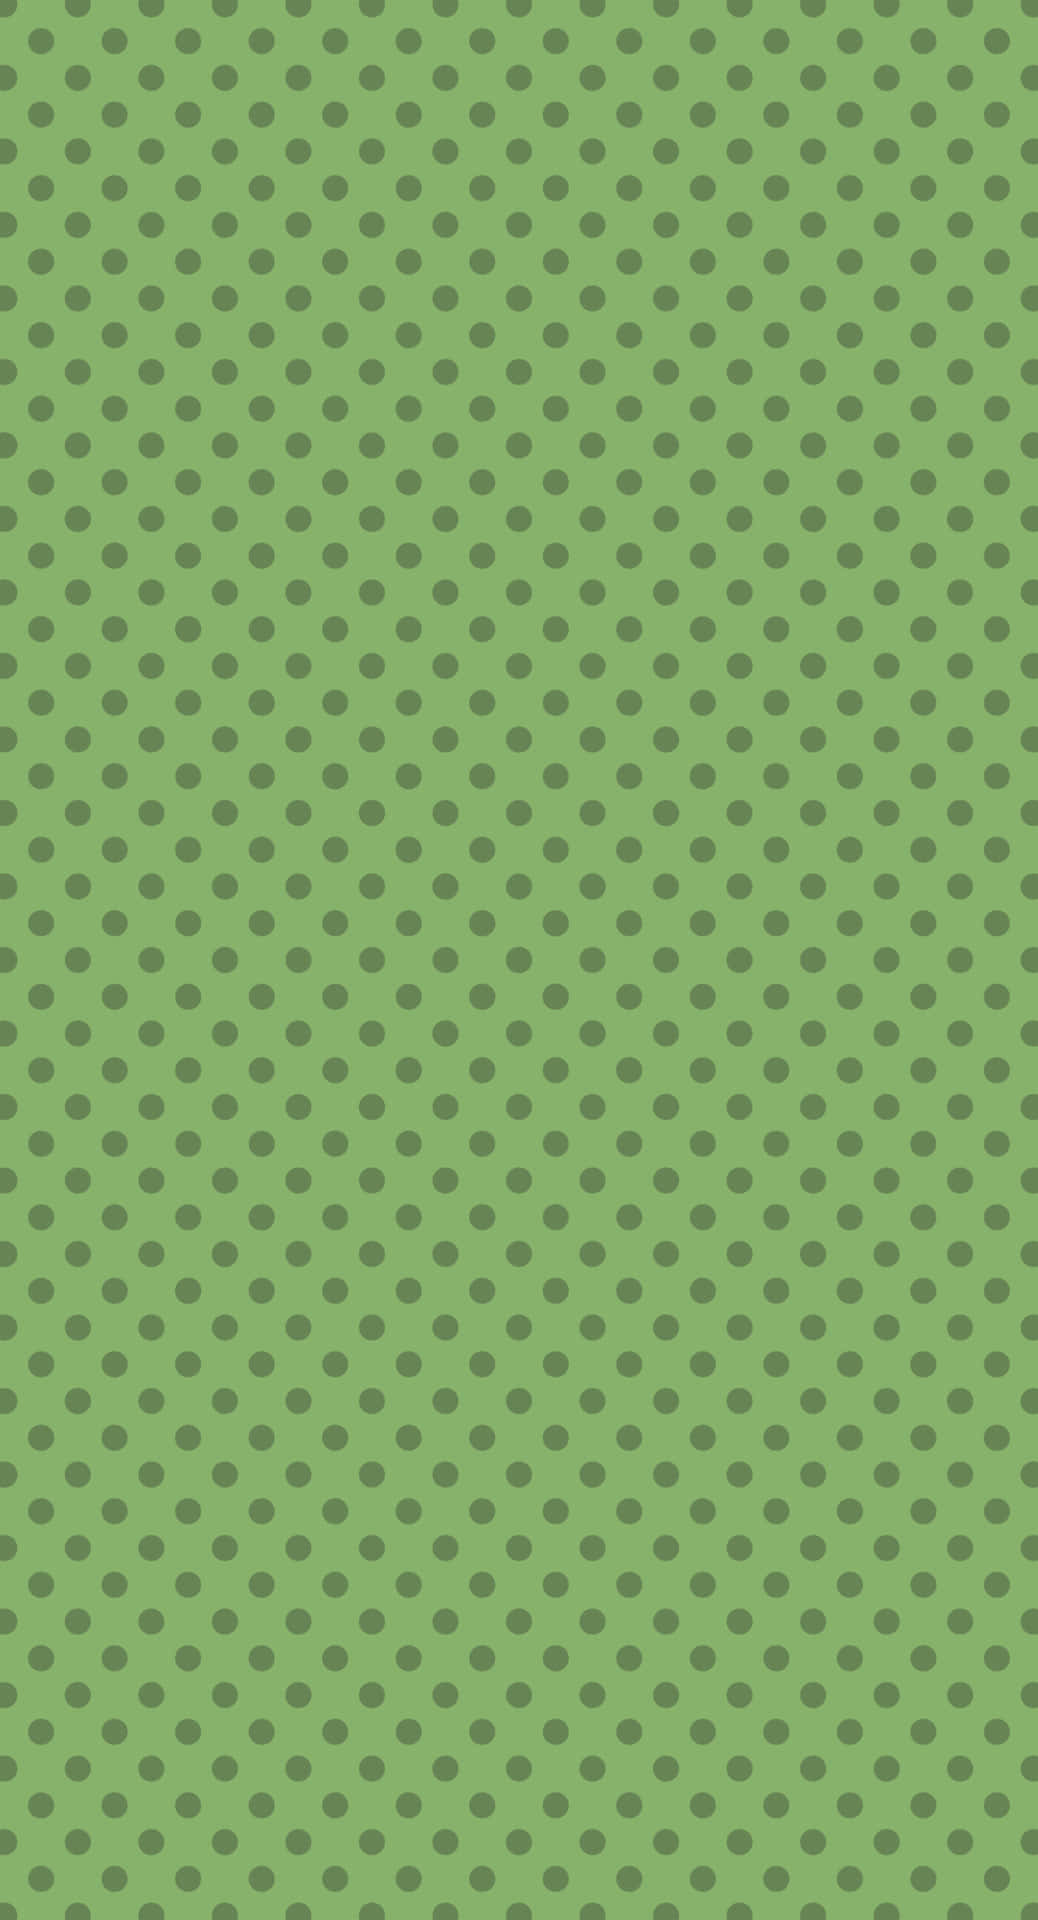 Cute Sage Green Surface Covered In Small Gray Circles